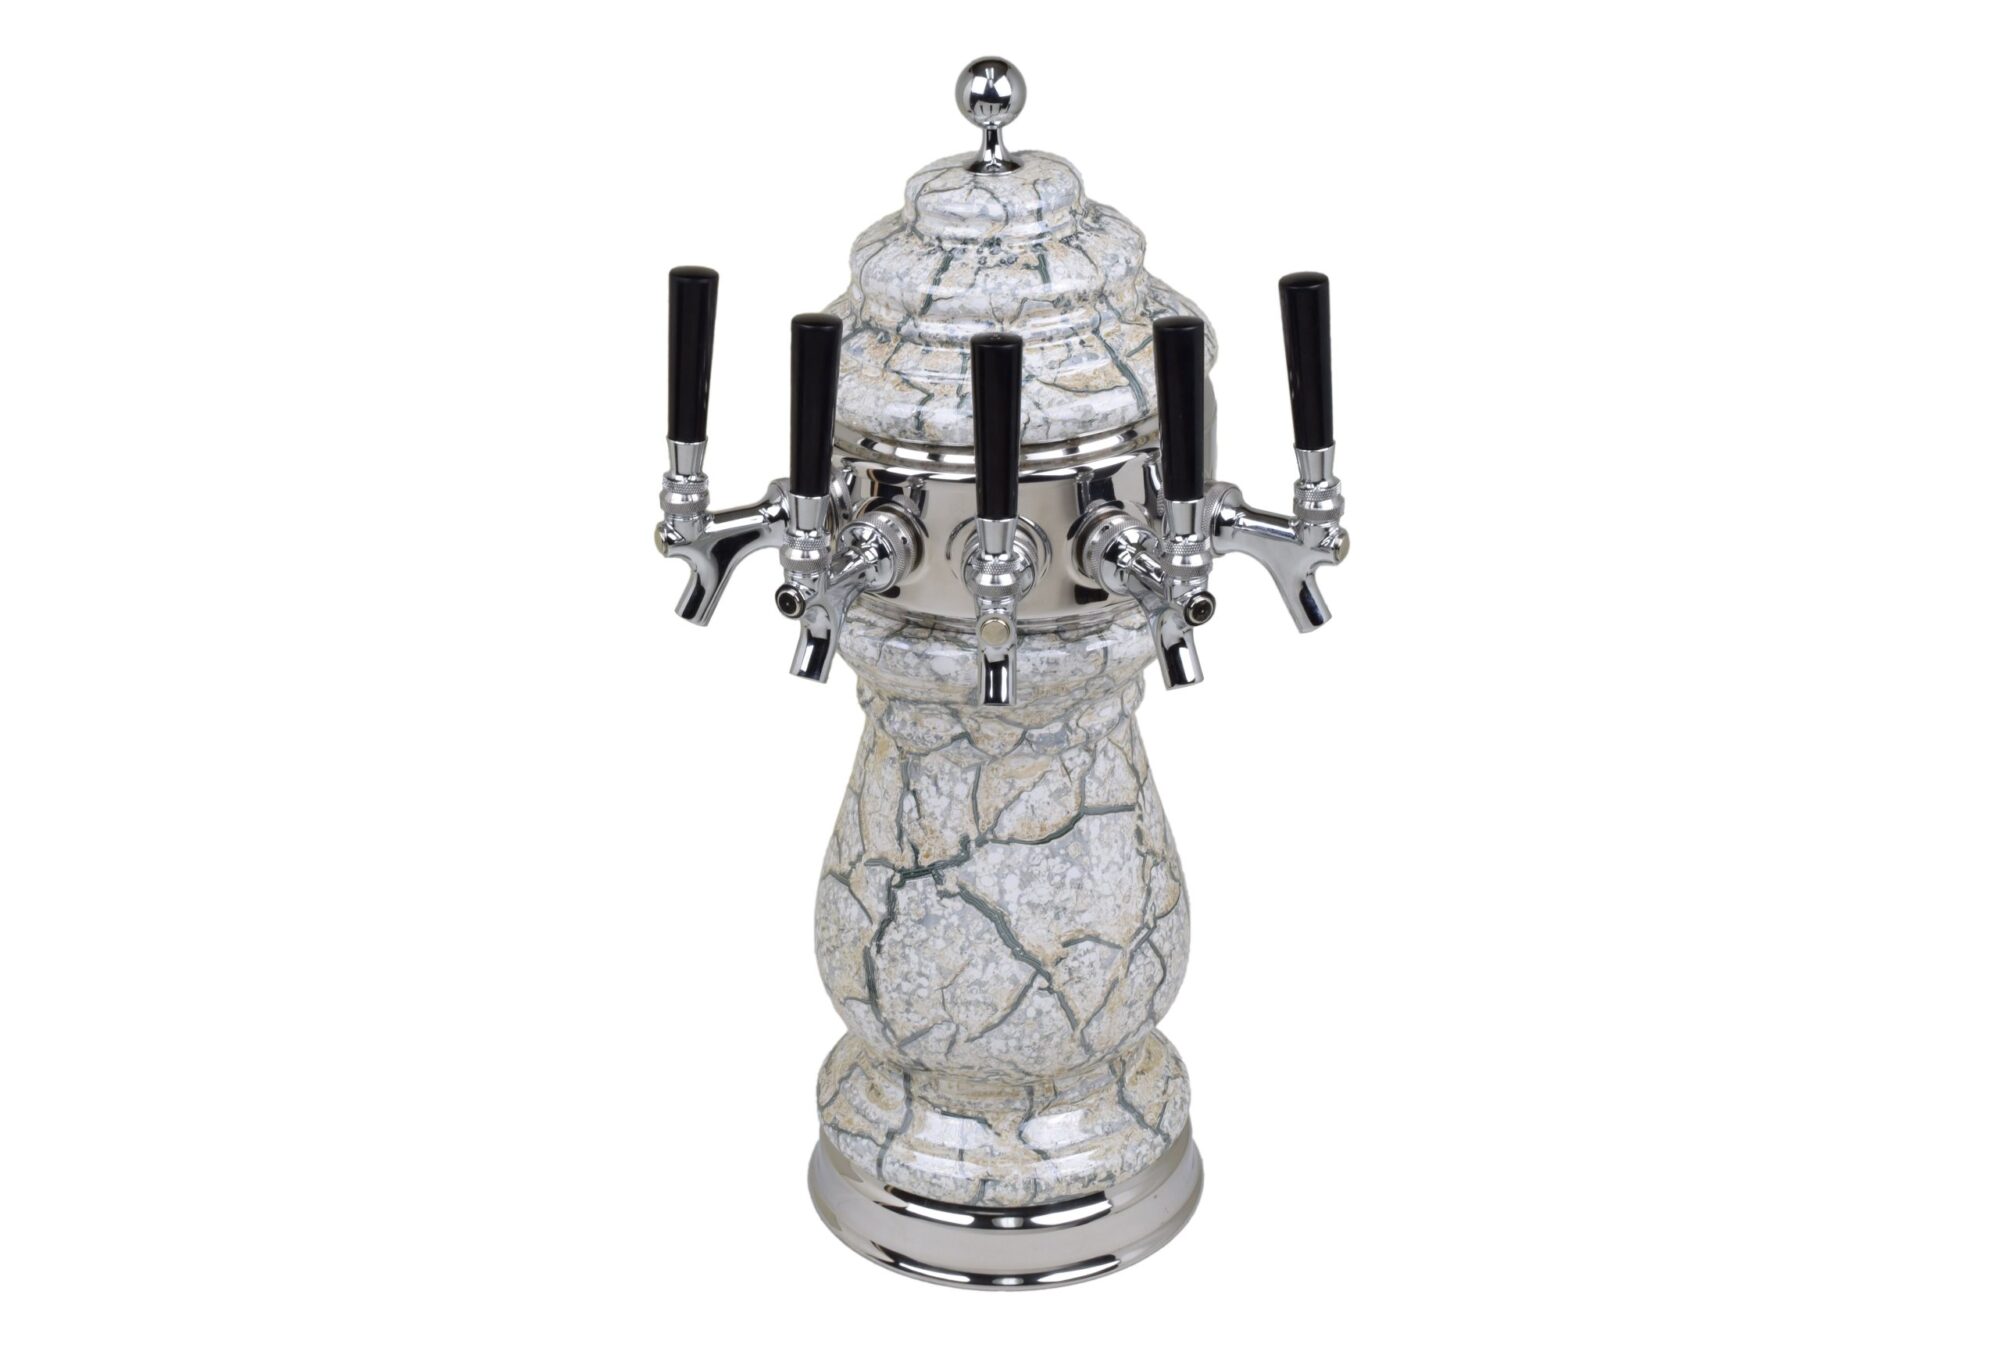 882C-5BeigeMarble Five Faucet Ceramic Tower with Chrome Plated Hardware - Available in 5 Colors - Shown in Beige Marble